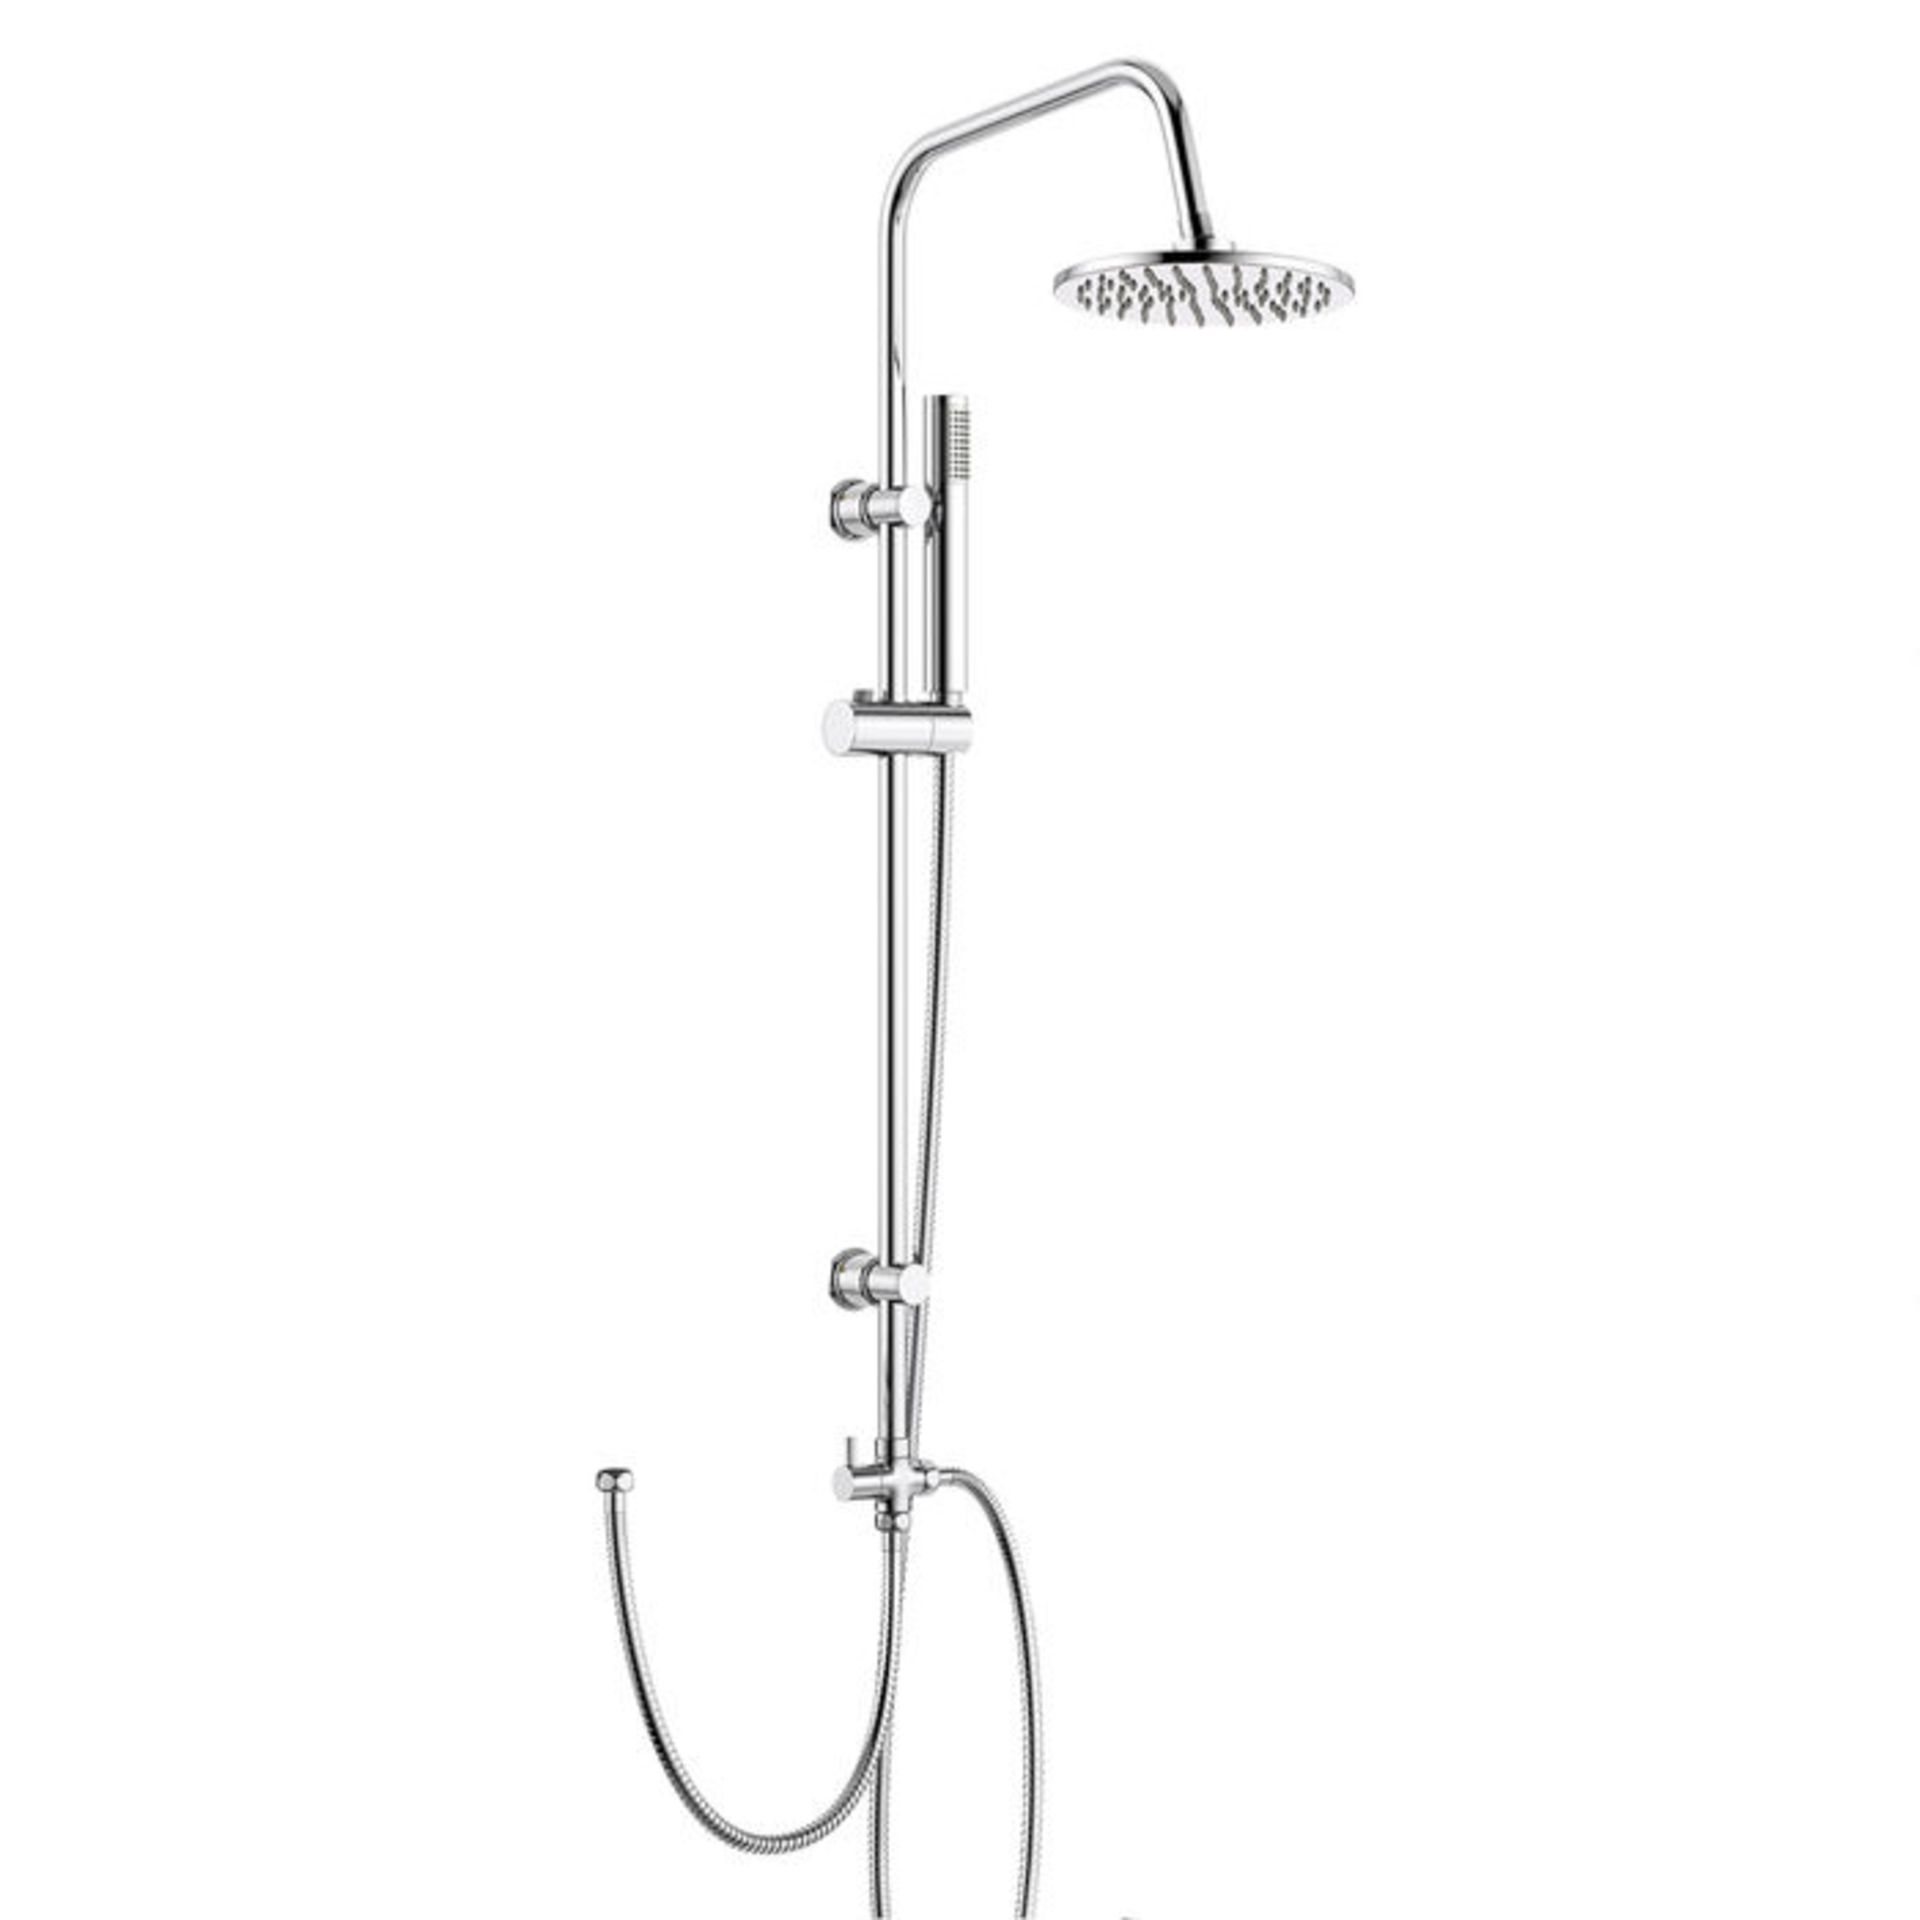 (EY203) 200mm Round Head, Riser Rail & Handheld Kit. Quality stainless steel shower head with Easy - Image 2 of 4